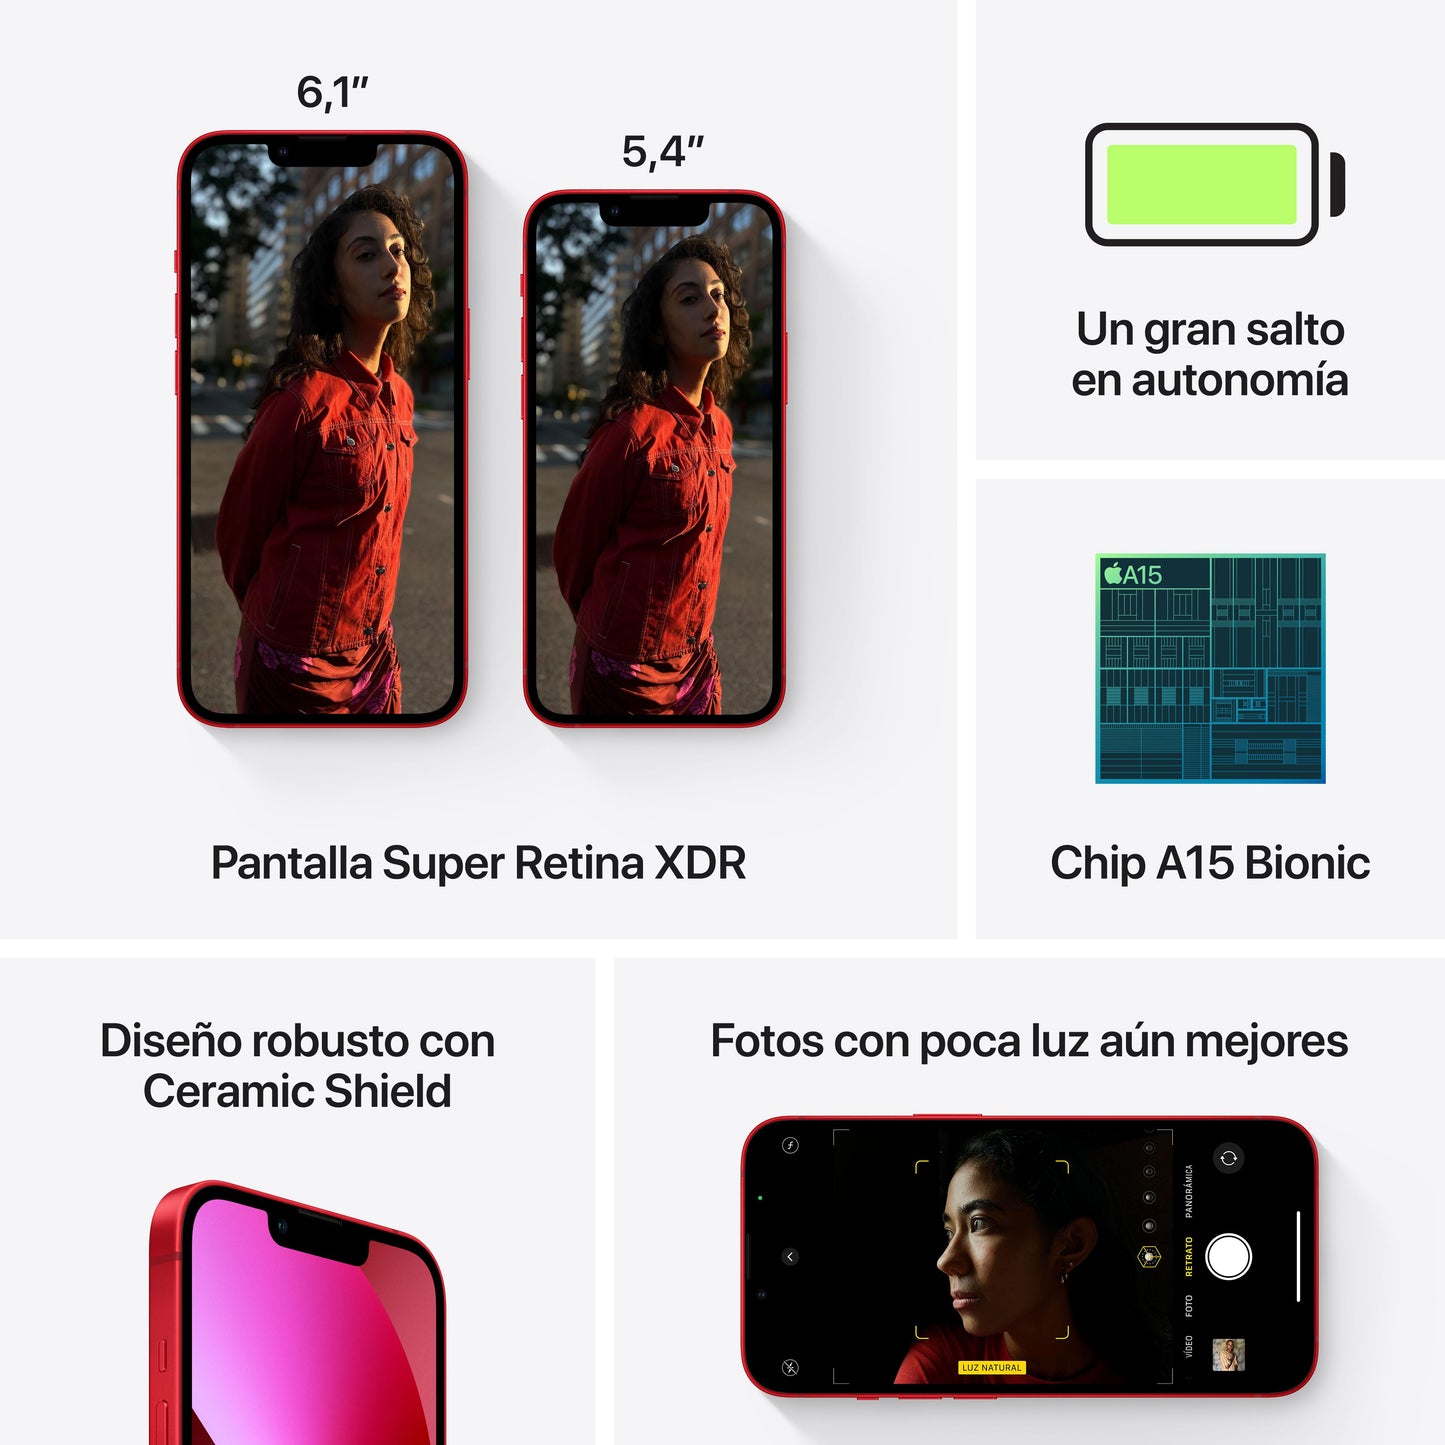 iPhone 13 256 GB (PRODUCT)RED - Rossellimac